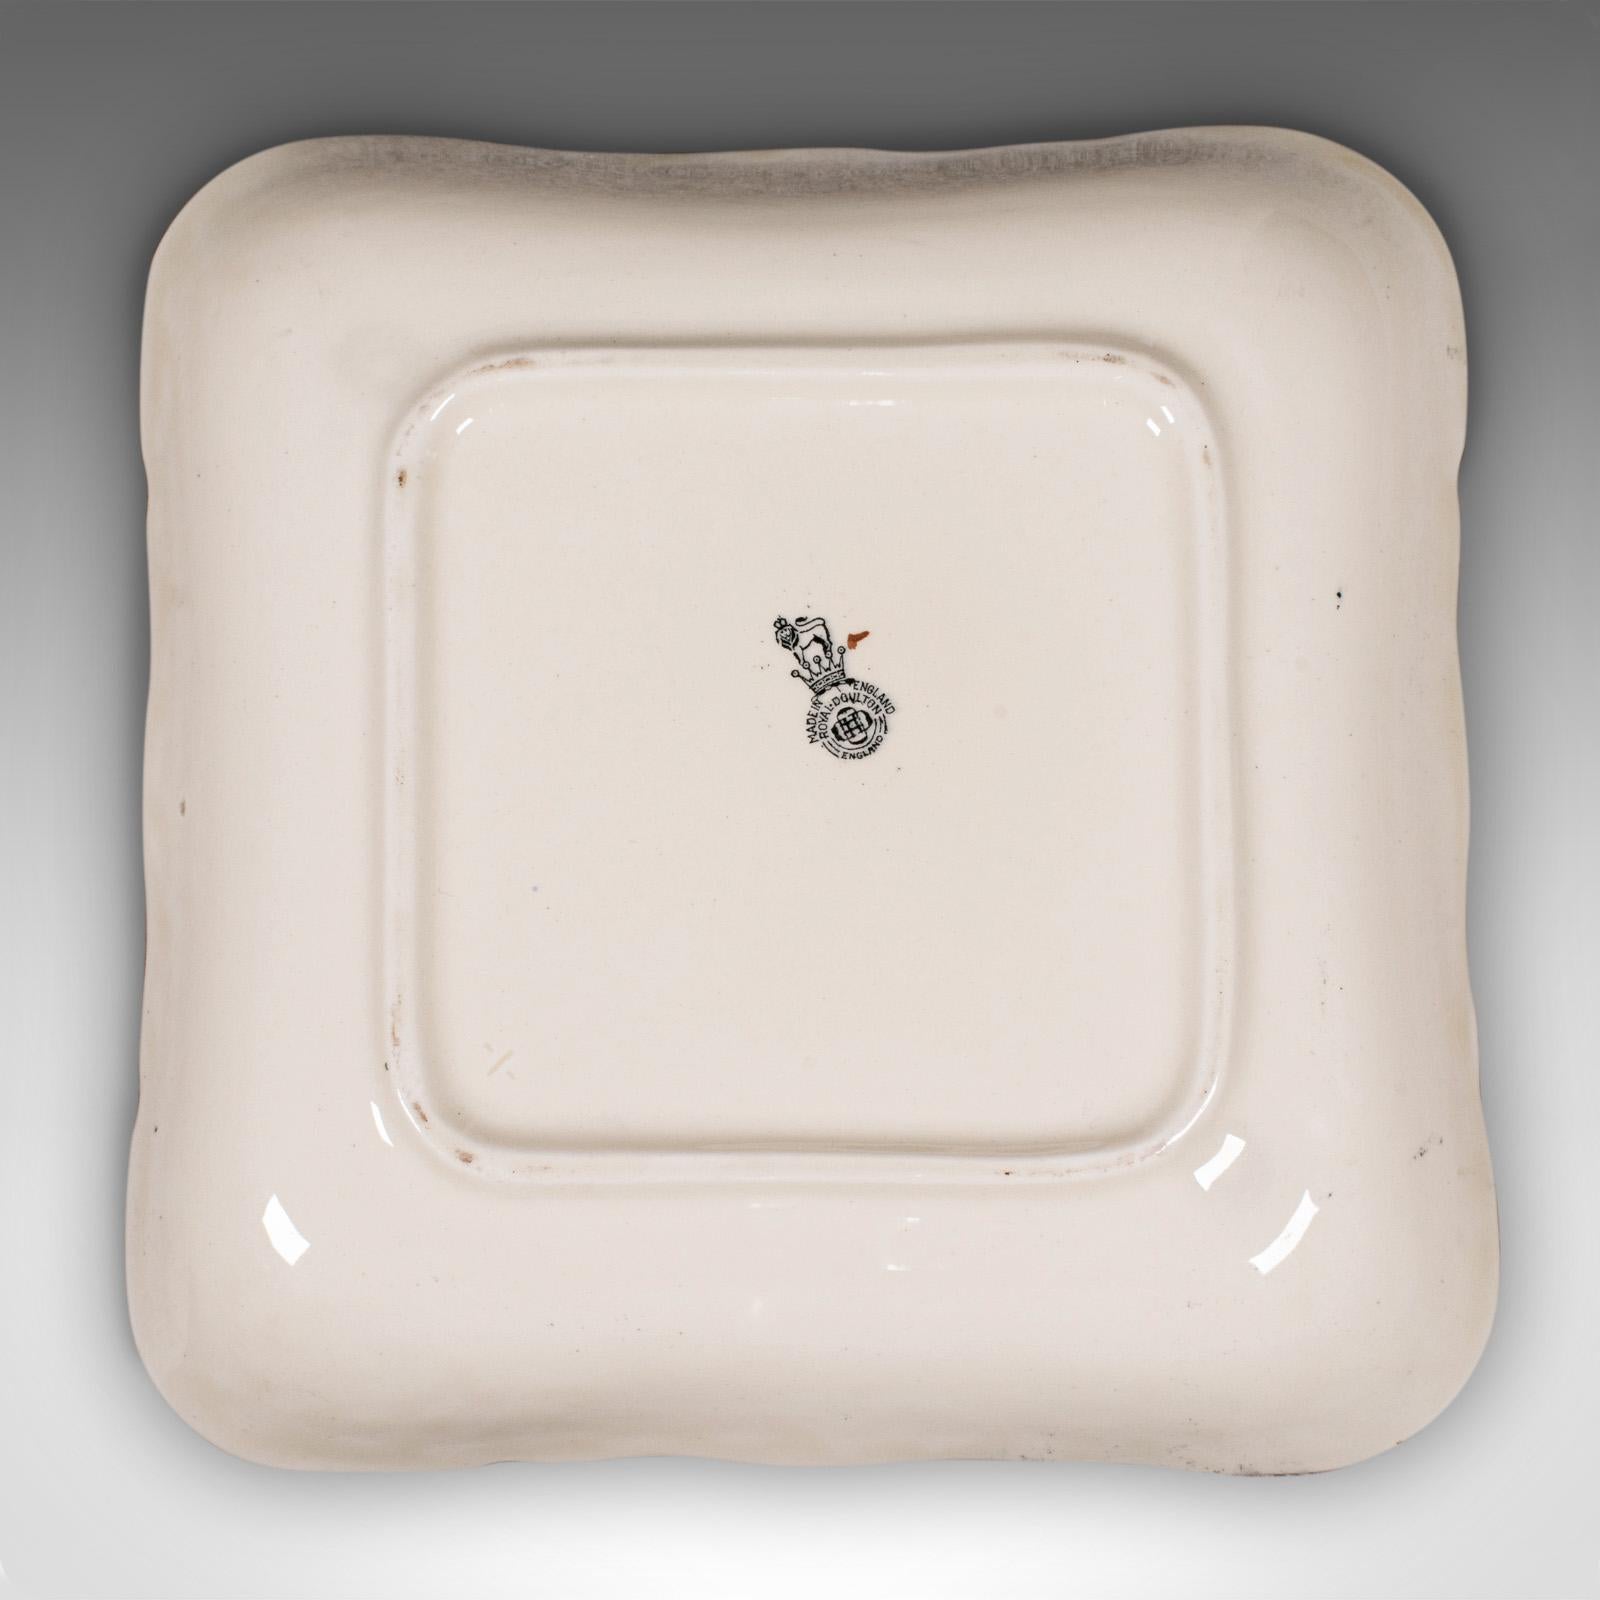 British Vintage Decorative Square Dish, English, Ceramic Serving Plate, Early 20th, 1930 For Sale